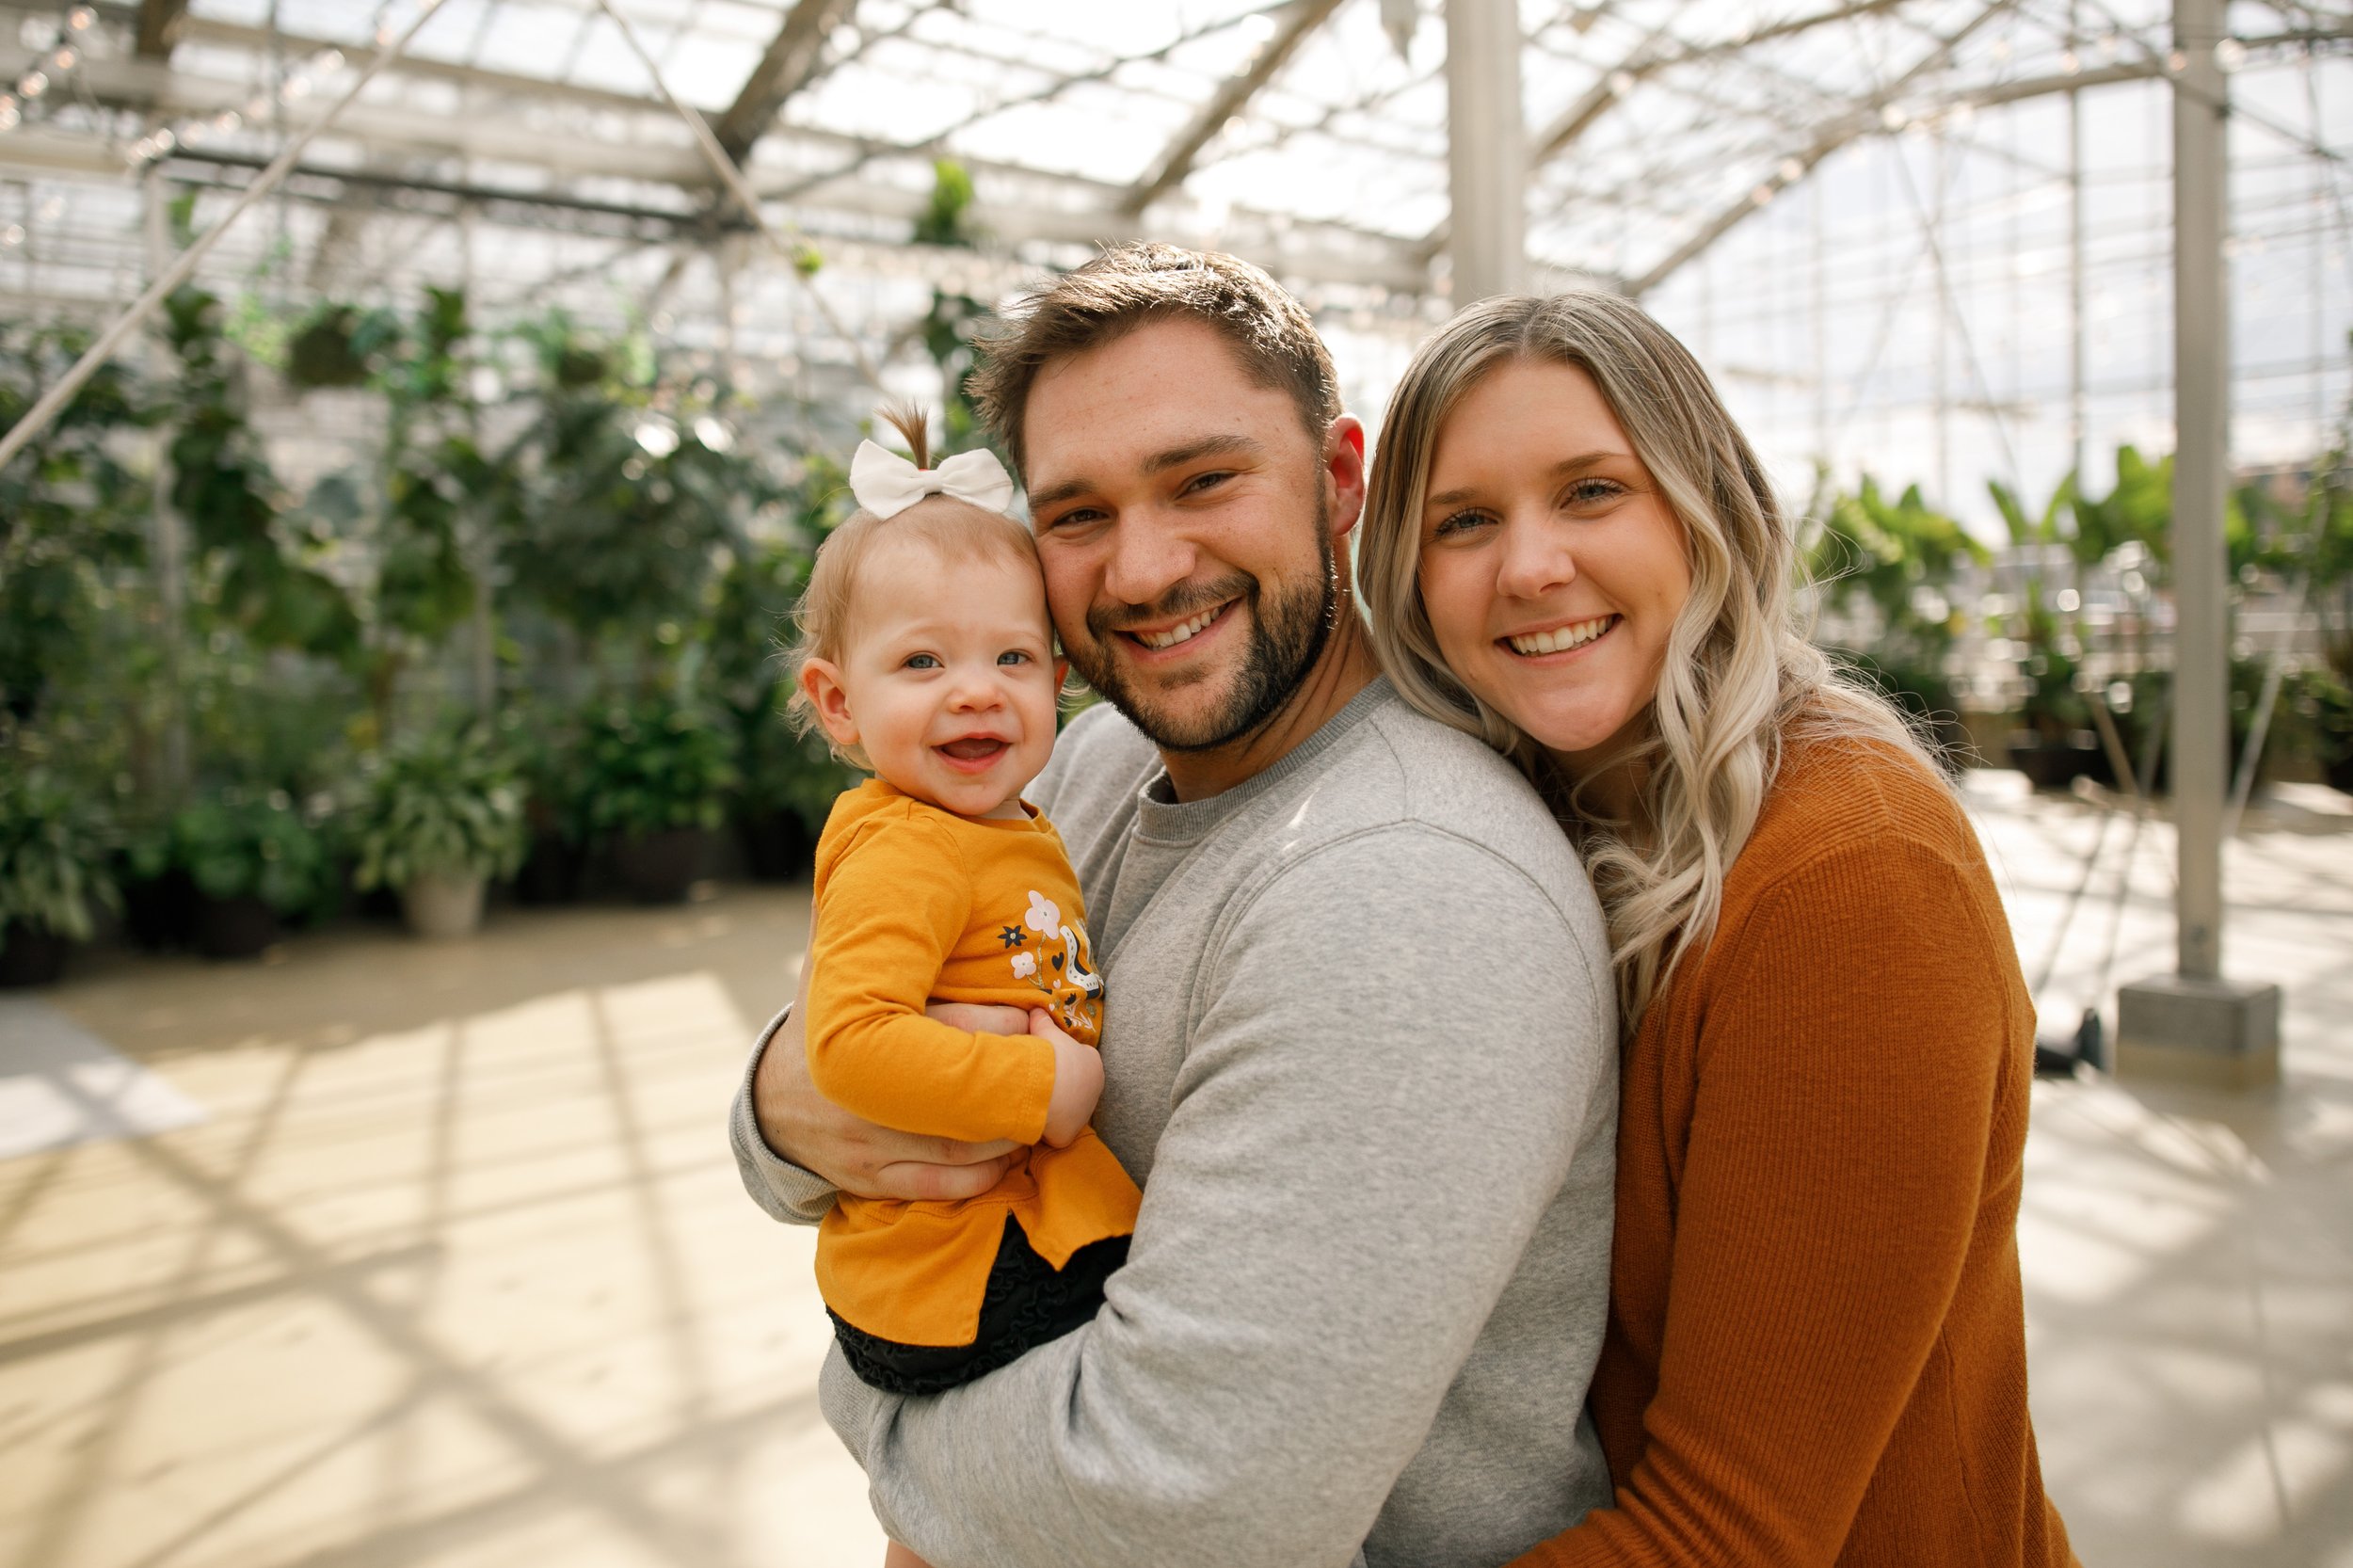 Downtown Market Greenhouse - Grand Rapids Family Photographer - Greenhouse Family Session - Downtown Market Grand Rapids - Vachon Family - J Darling Photo30.jpg